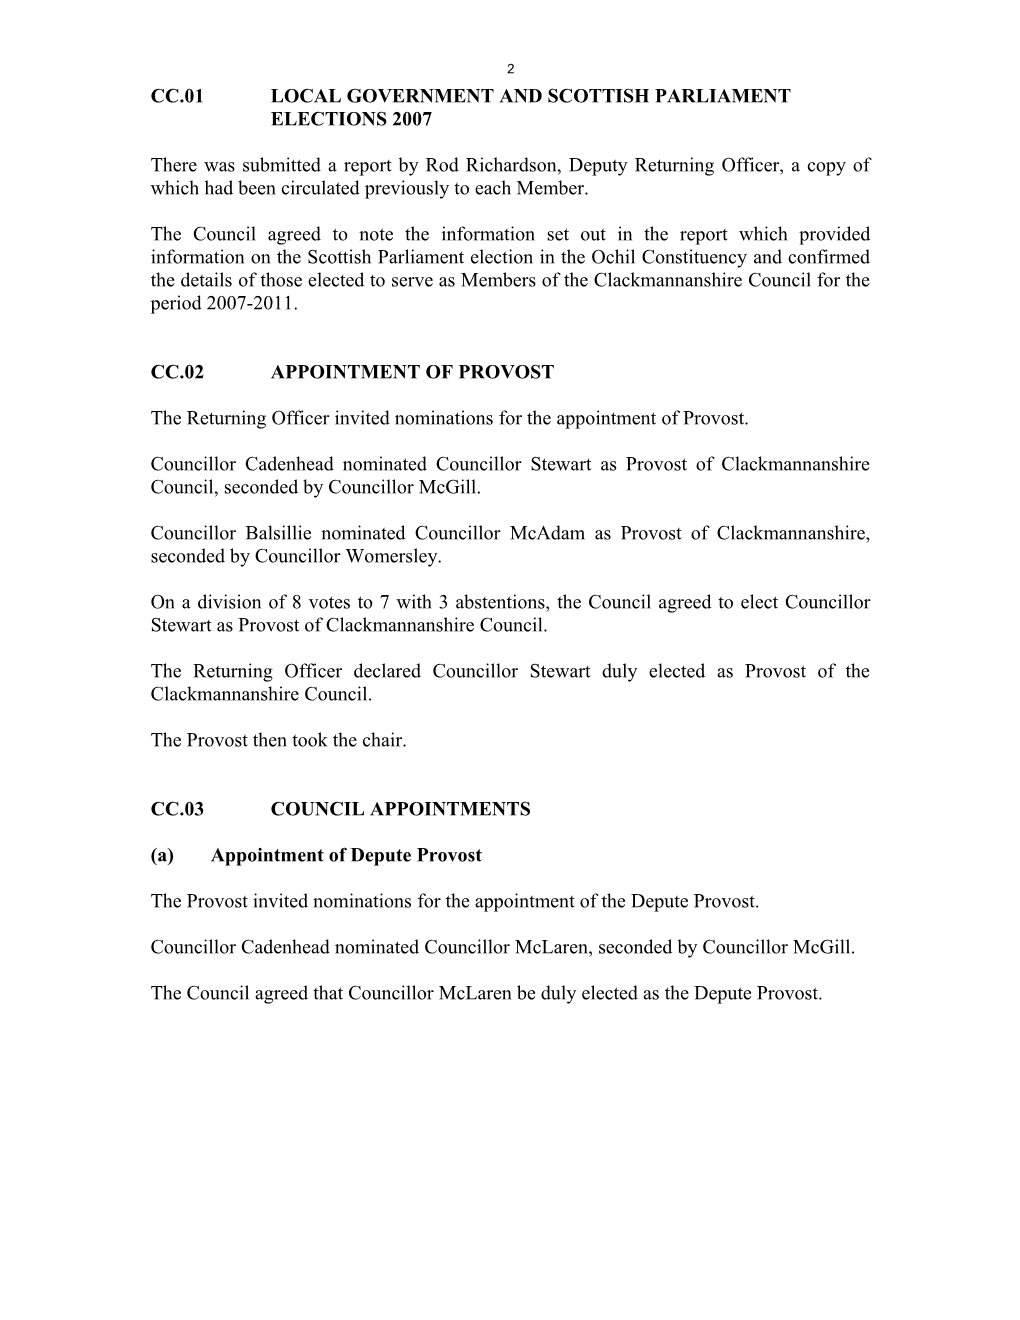 Minute of Council Meeting Held on 24Th May 2007